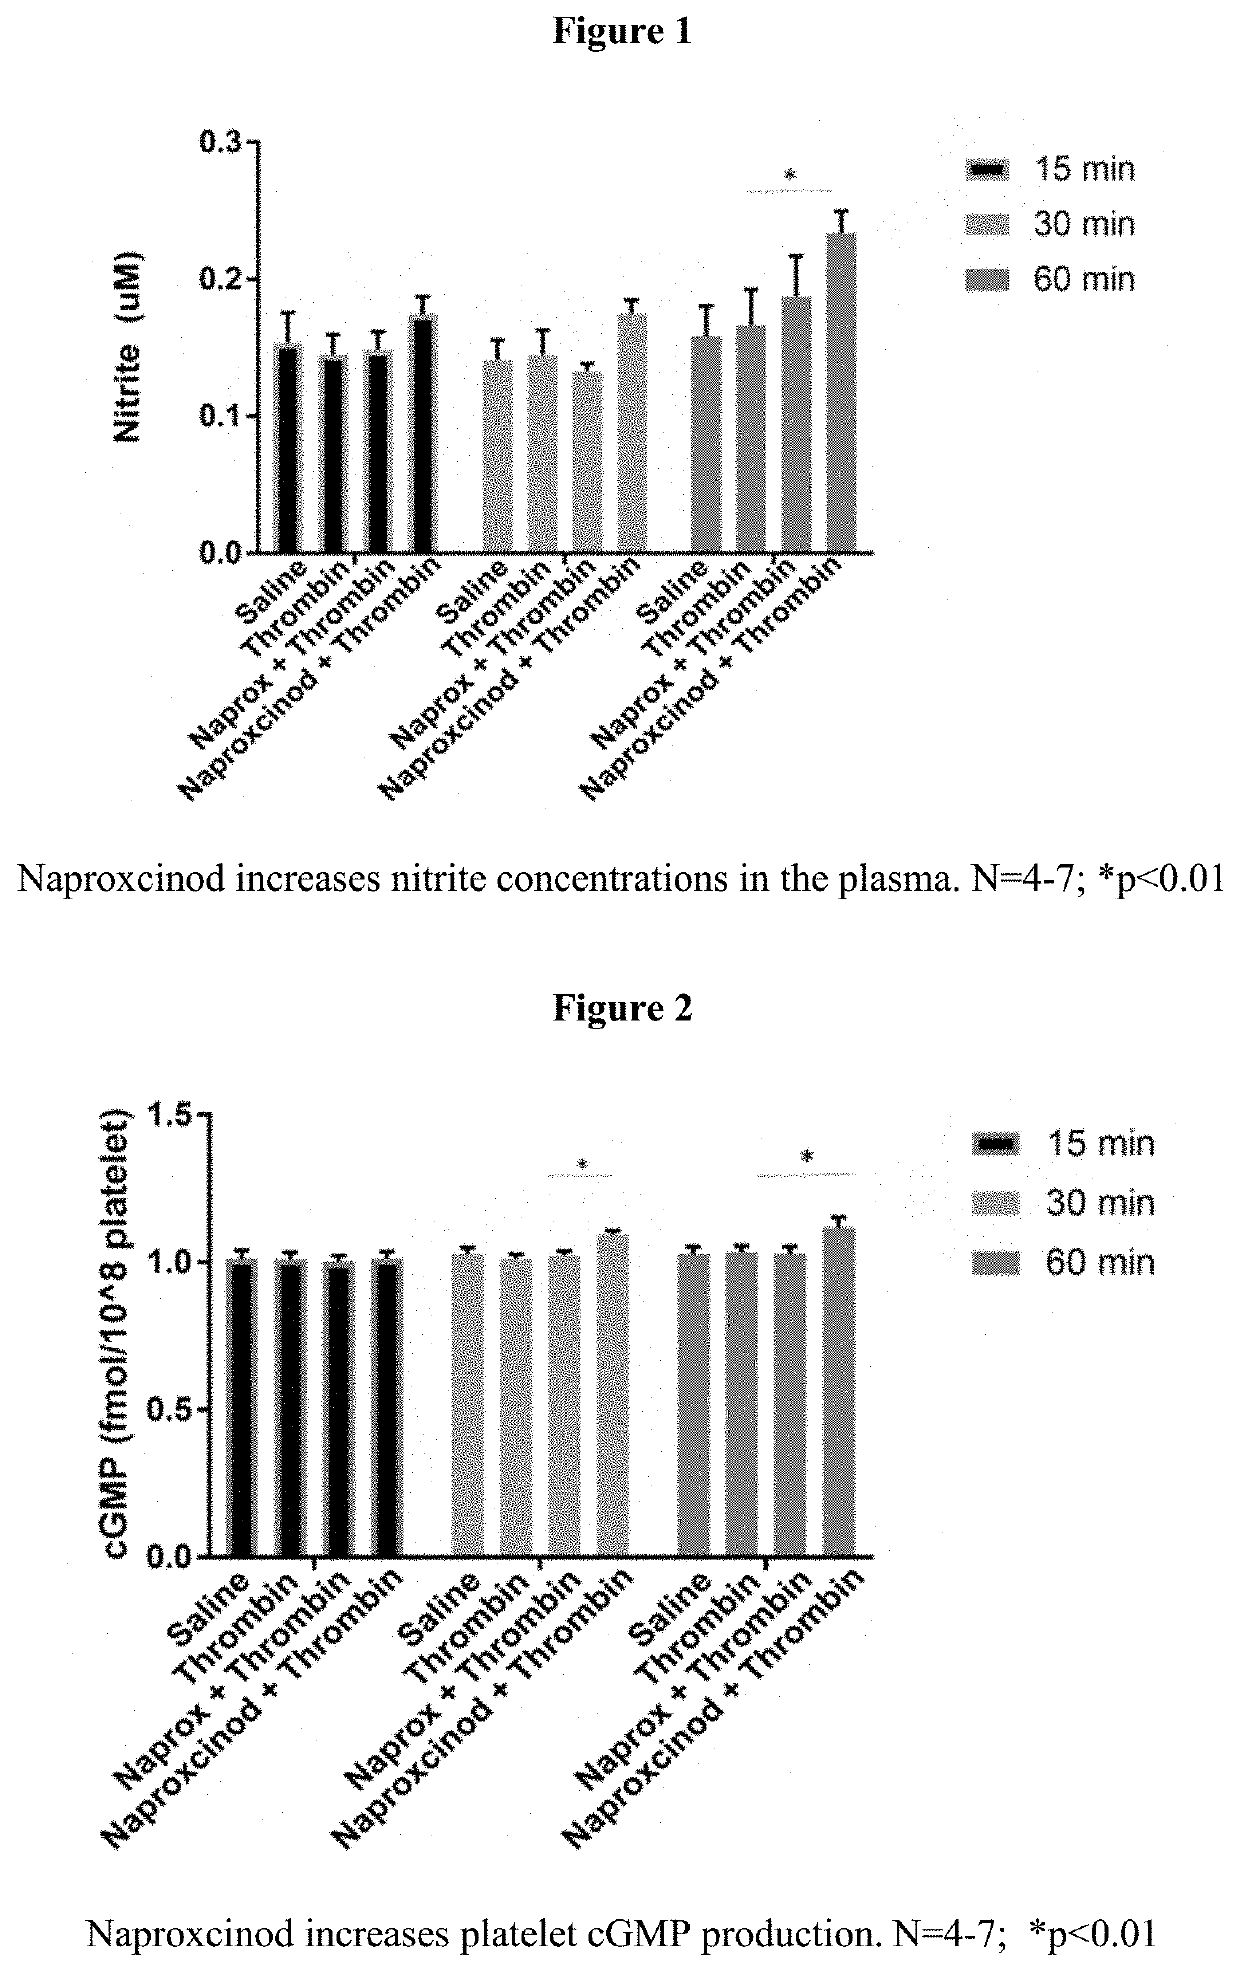 Method for treating vaso occlusive crises associated with sickle cell disease